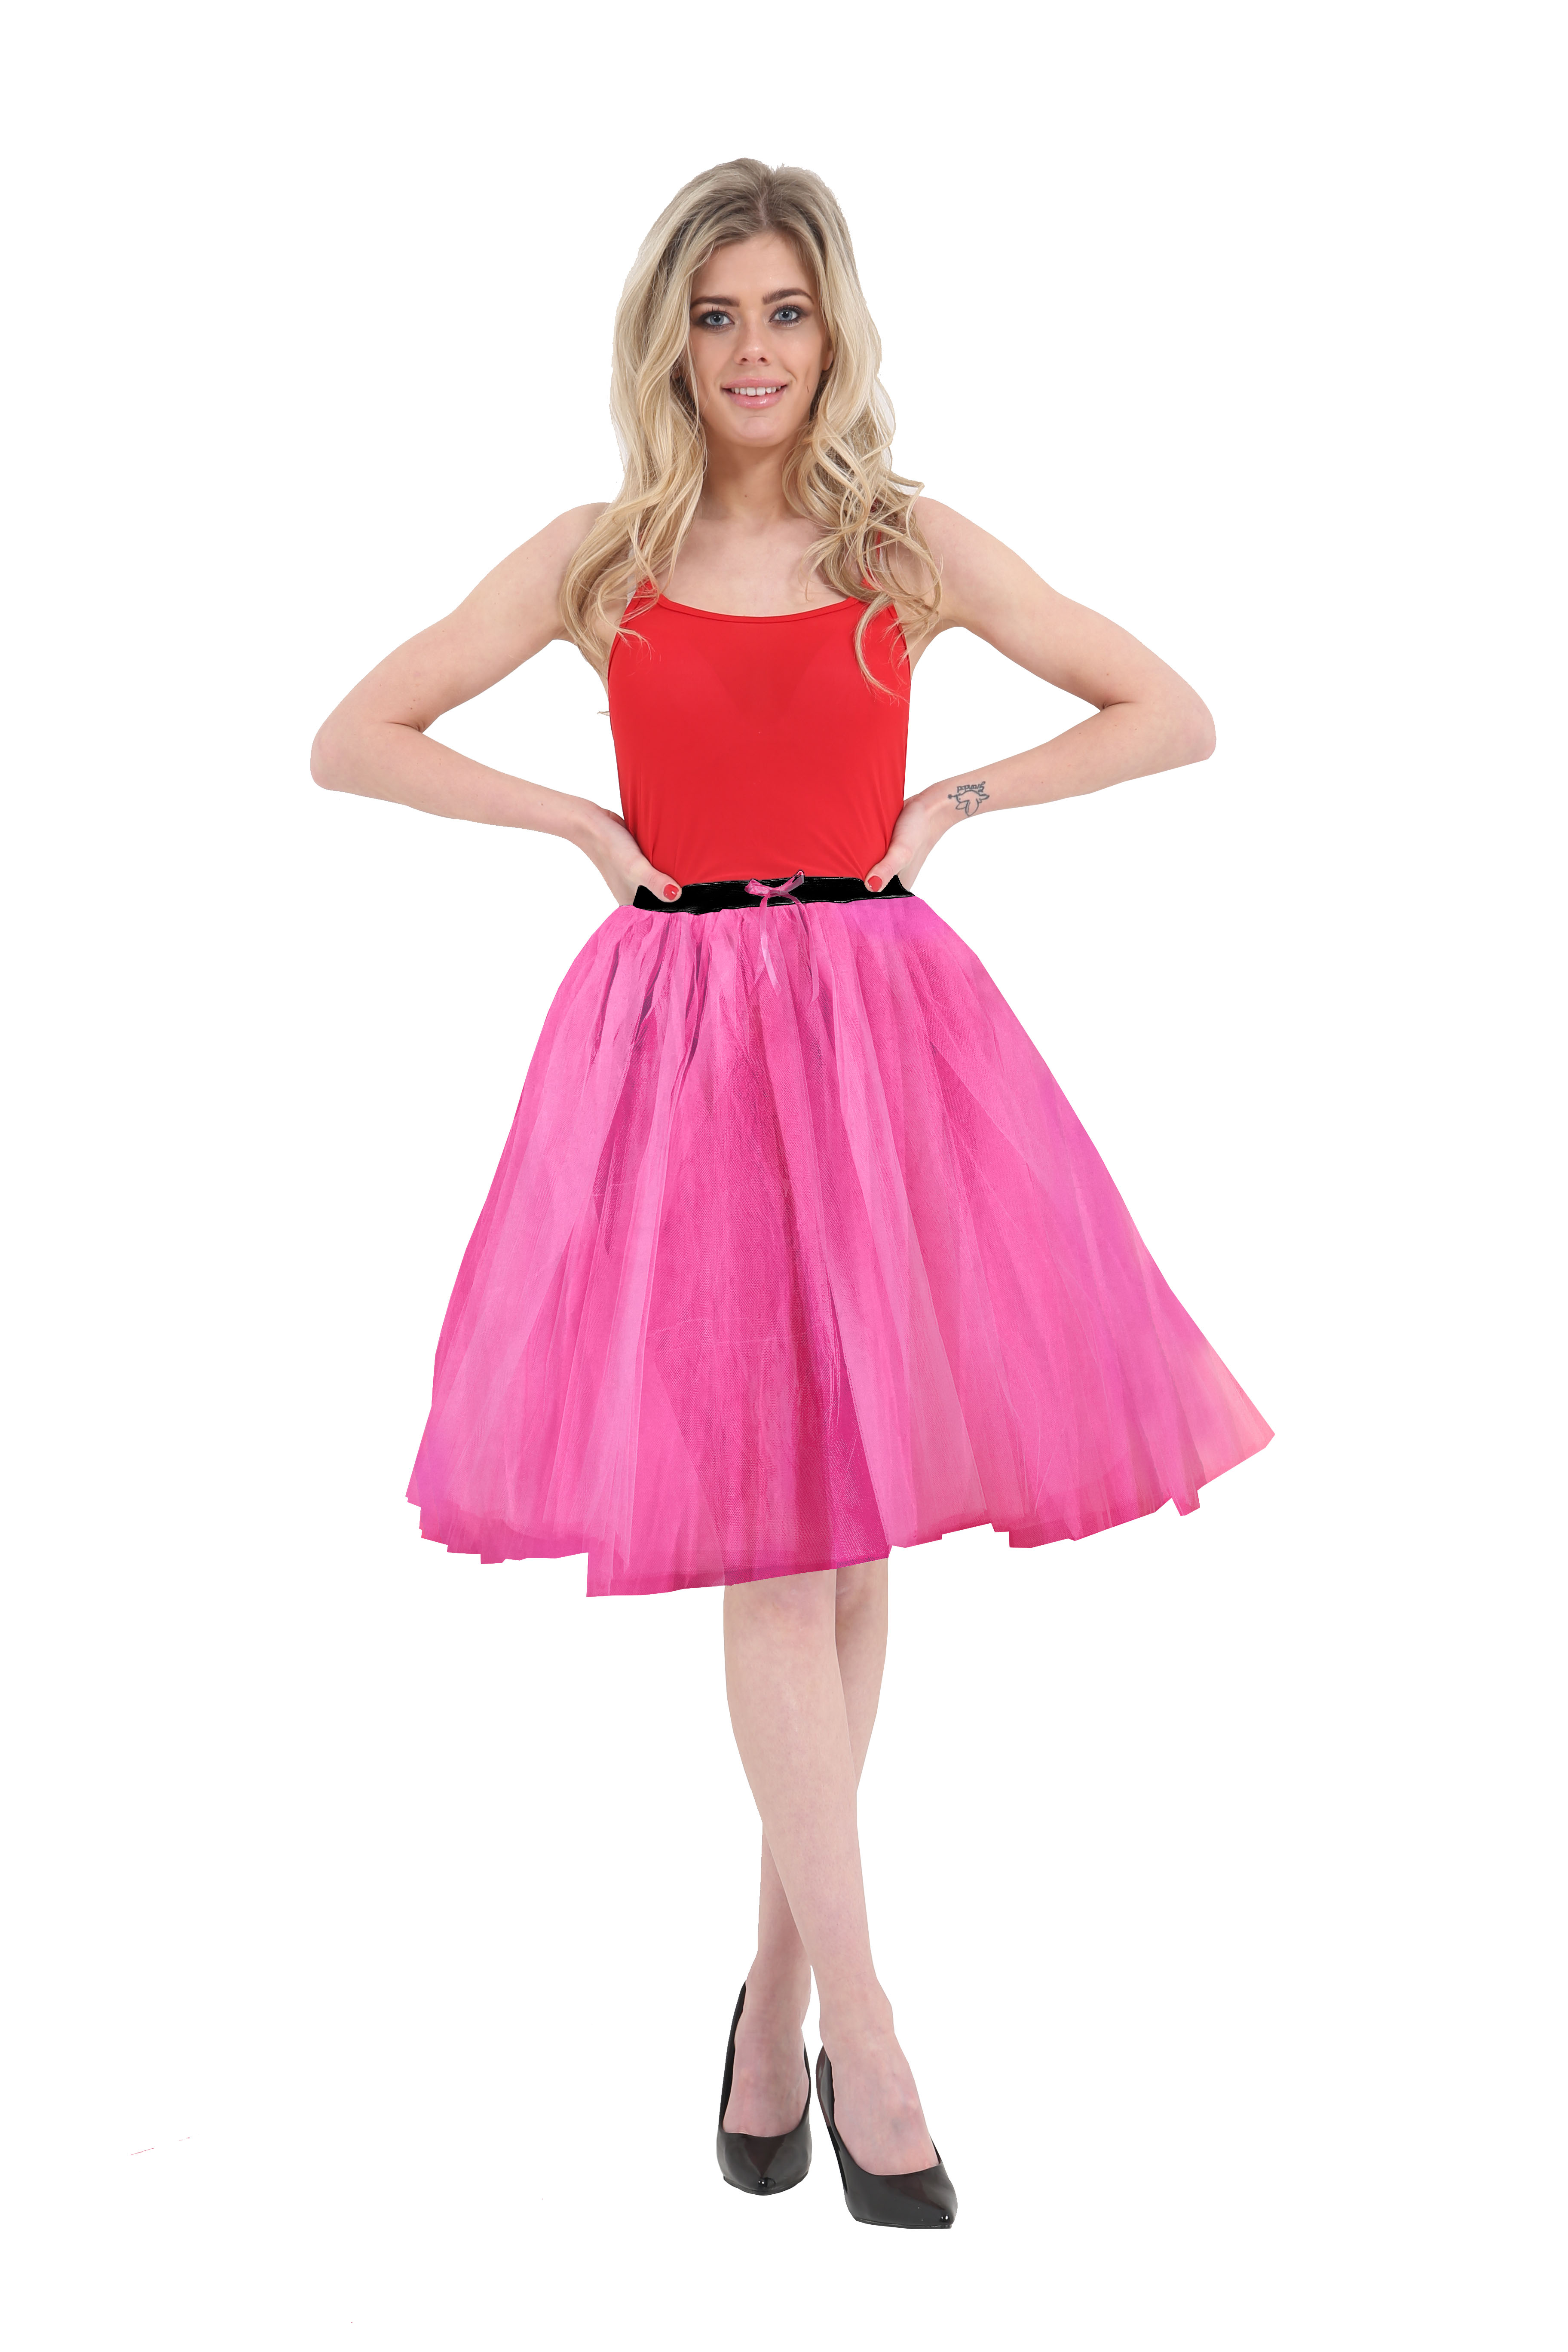 Crazy Chick Adult 3 Layer Pink 25 Inches Long Tutu Skirt